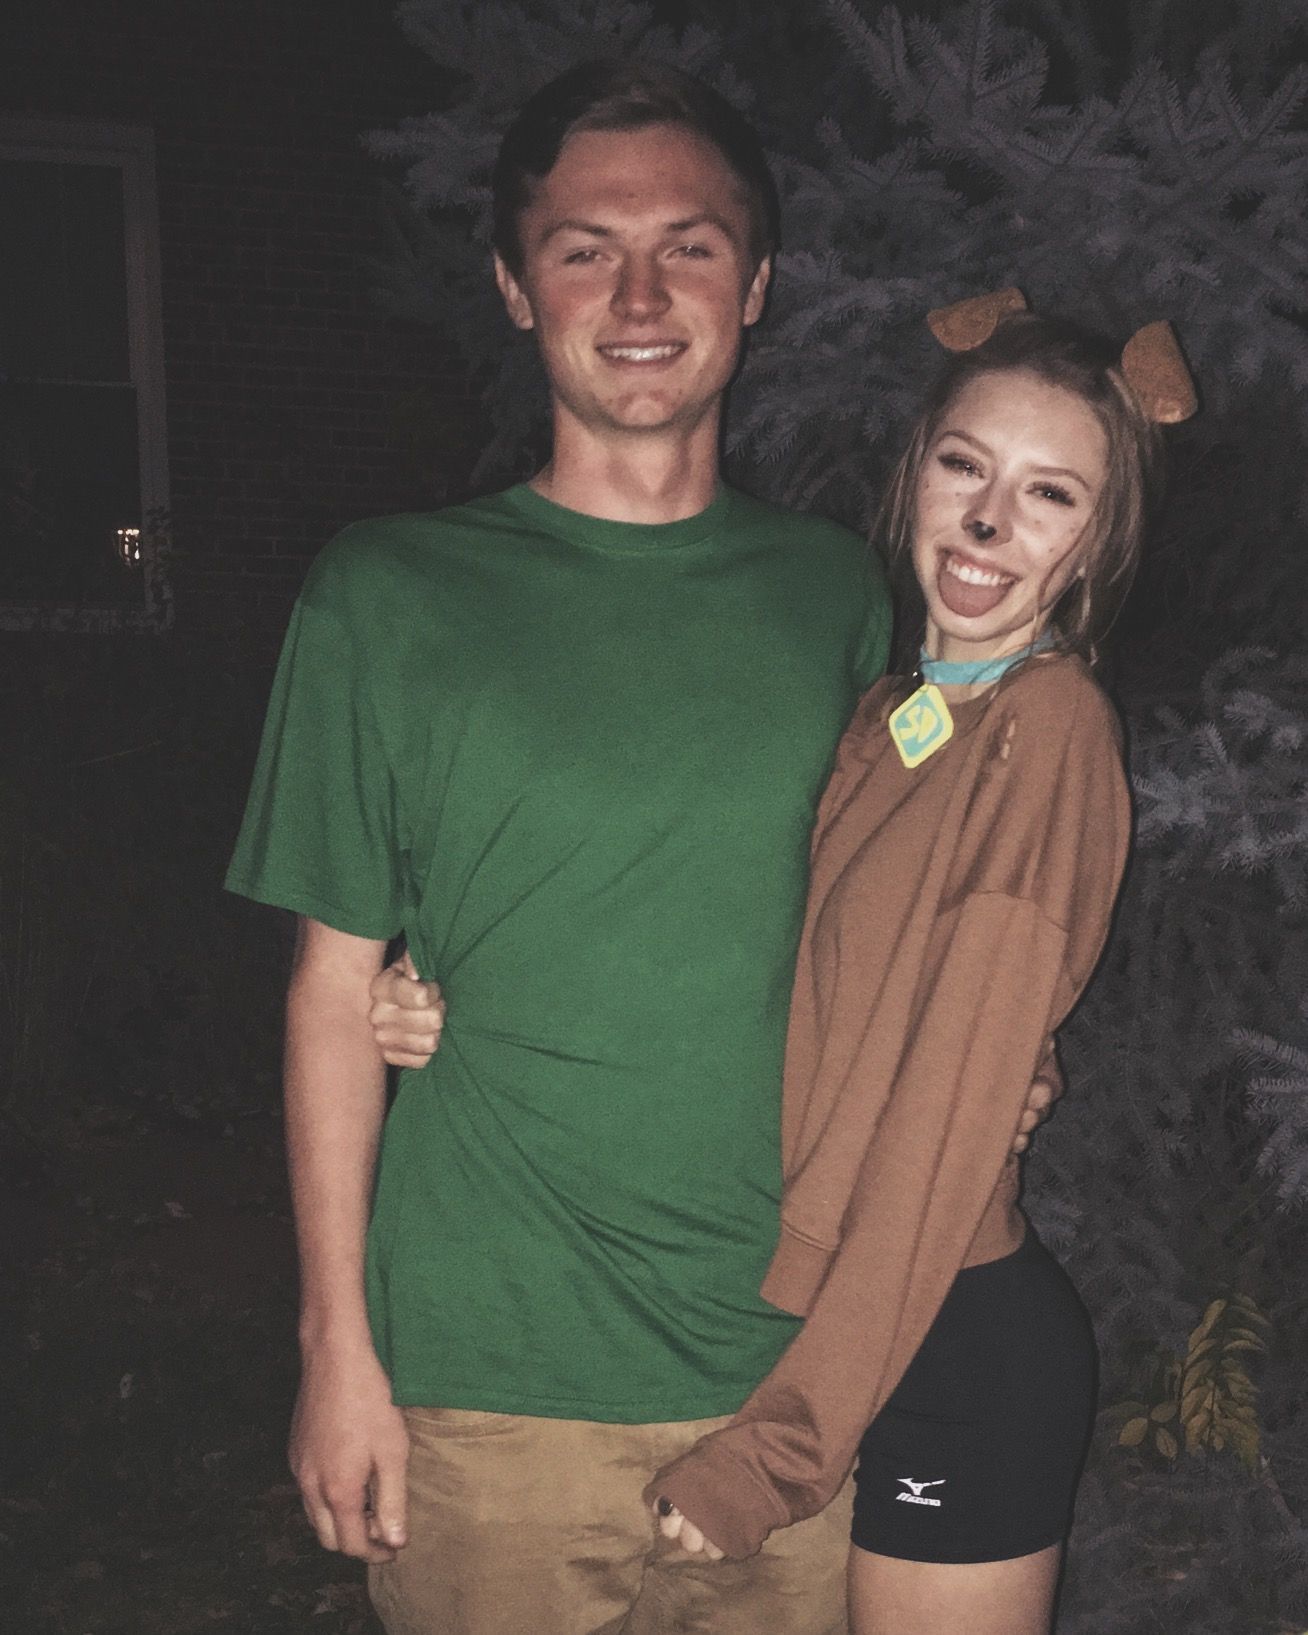 Keegan and I were Scooby and Shaggy for Halloween and got compliments all night! Had so much fun making this costume!  Last minute